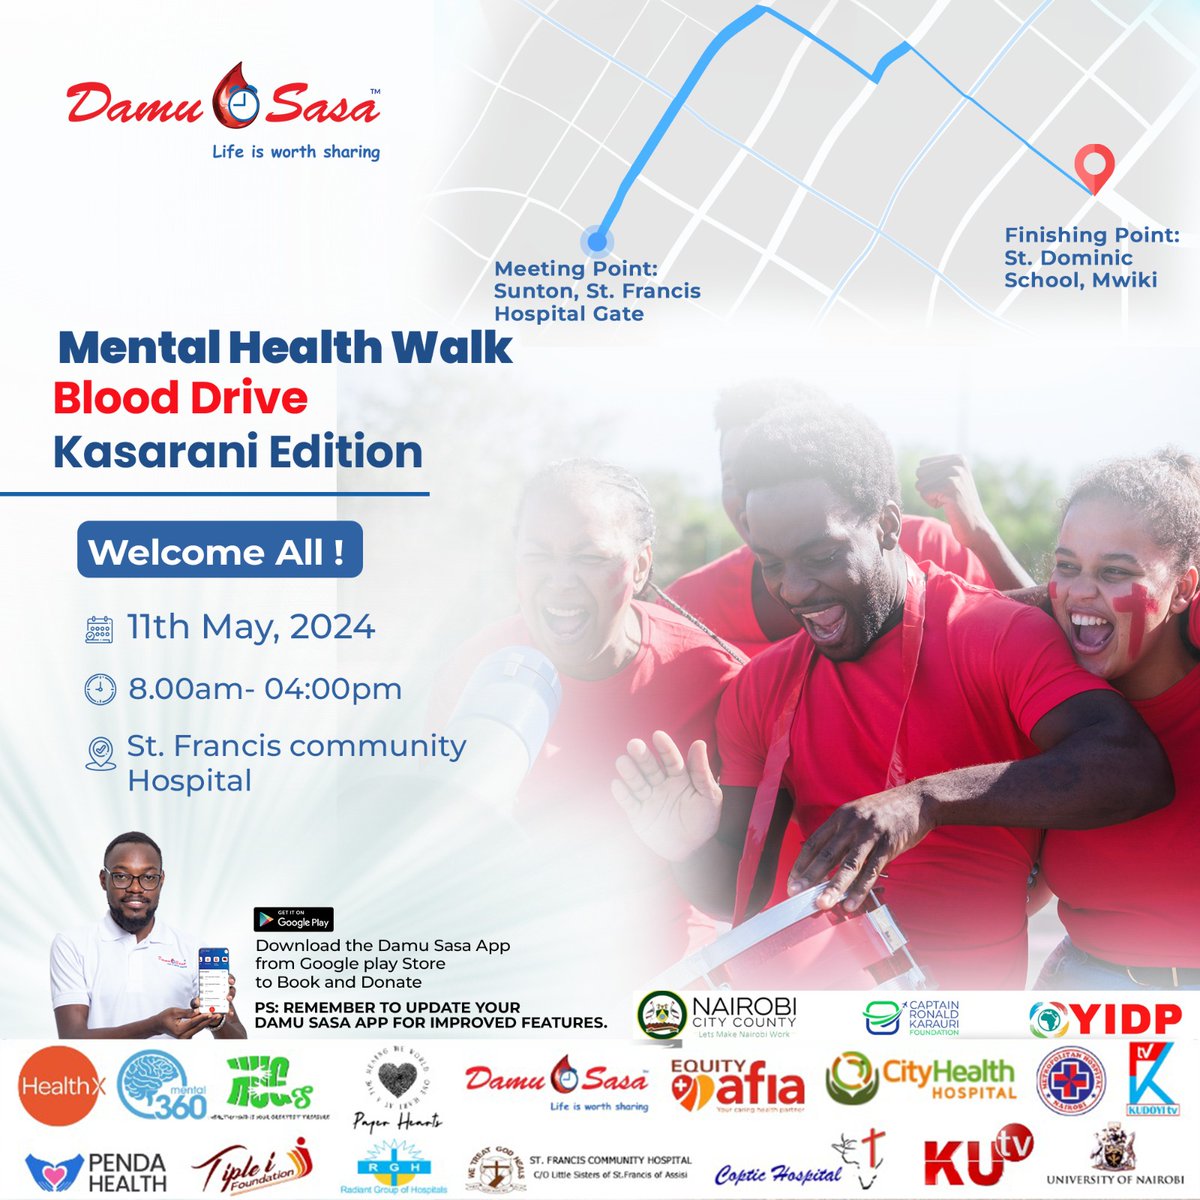 Today's the day! Join us for the Mental Health Walk Event and Blood Drive: Kasarani Edition. See you there! #MentalHealthWalkBloodDrive #BloodDrive #DamuSasa